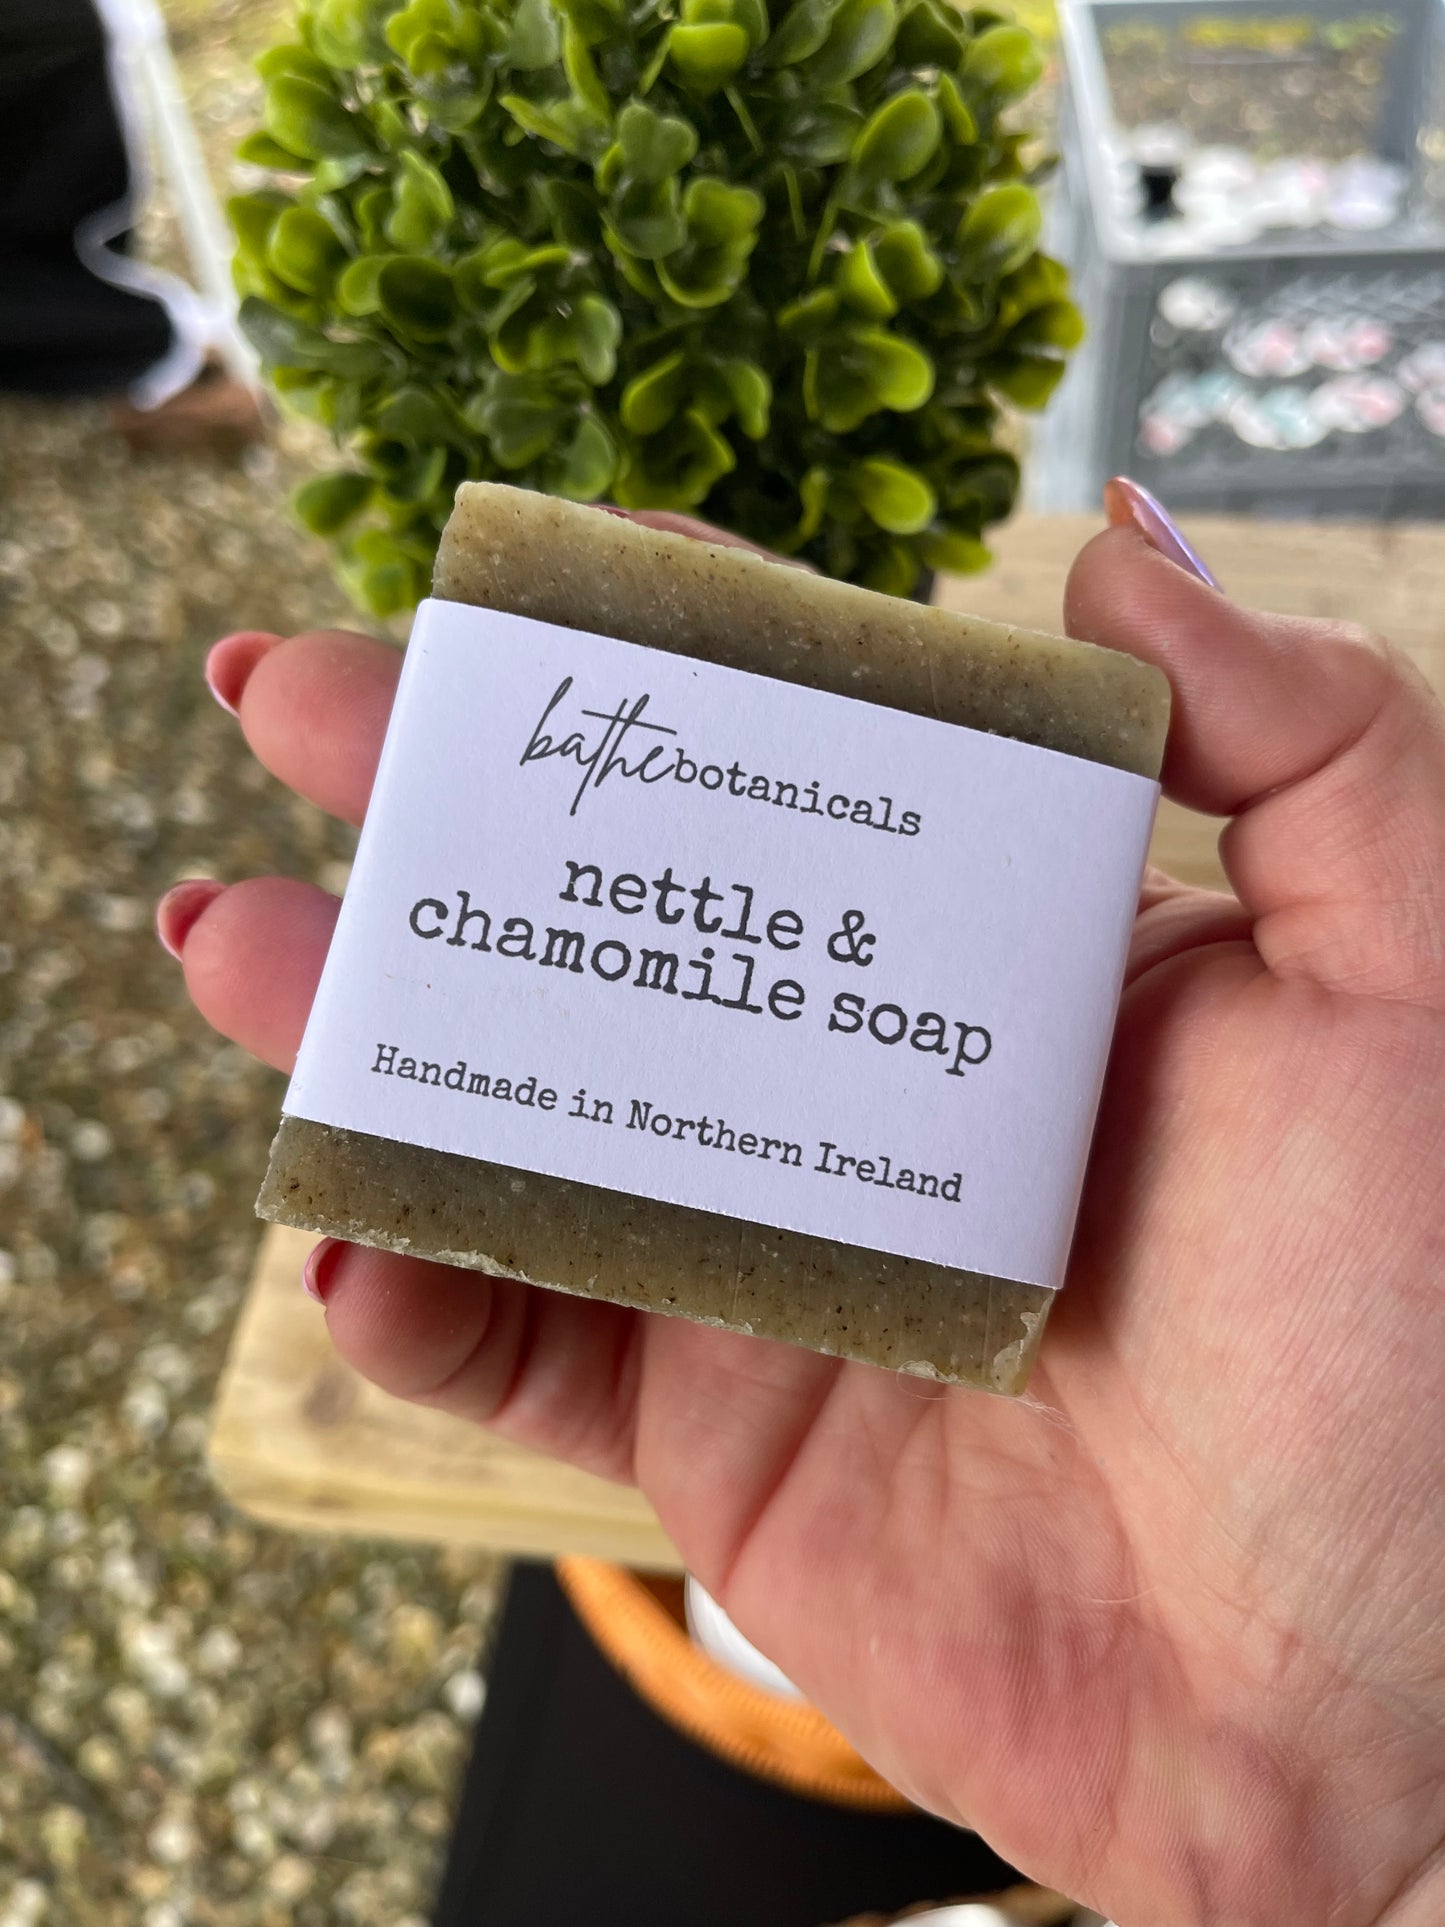 Nettle and chamomile soap